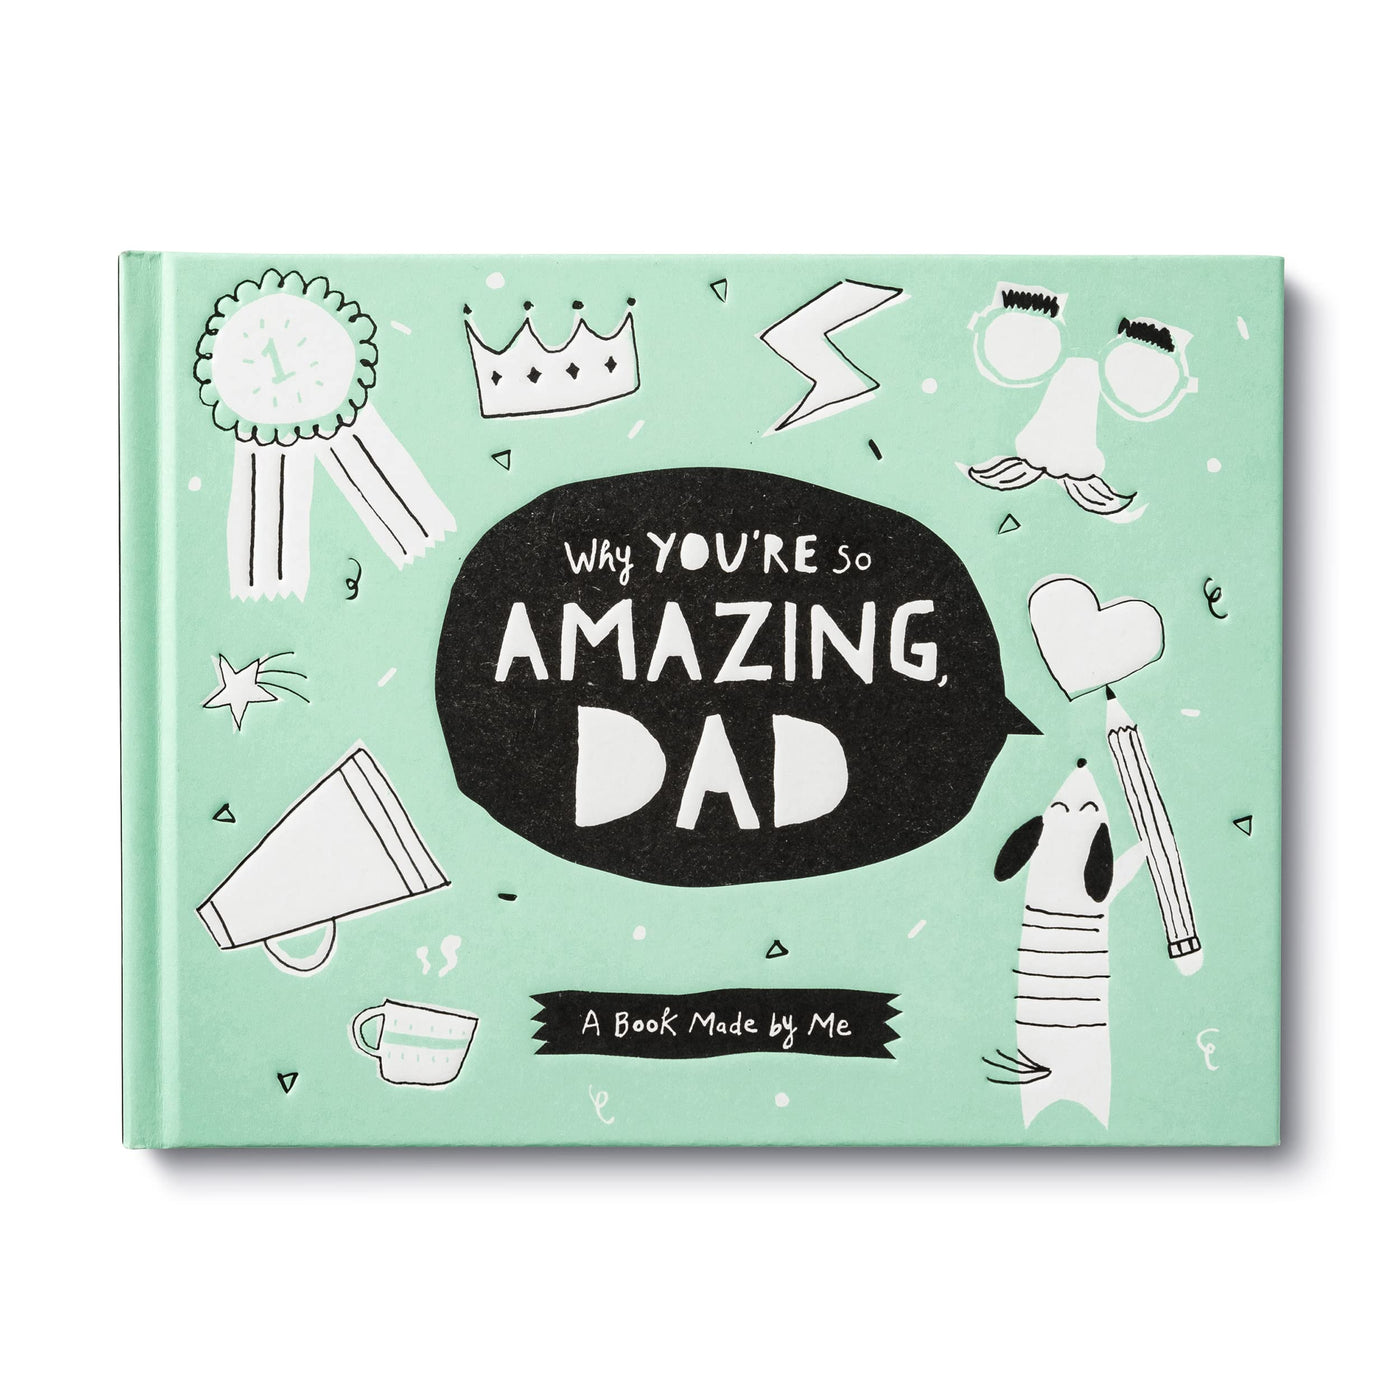 Why You're So Amazing Dad Fill-In the Blank Book